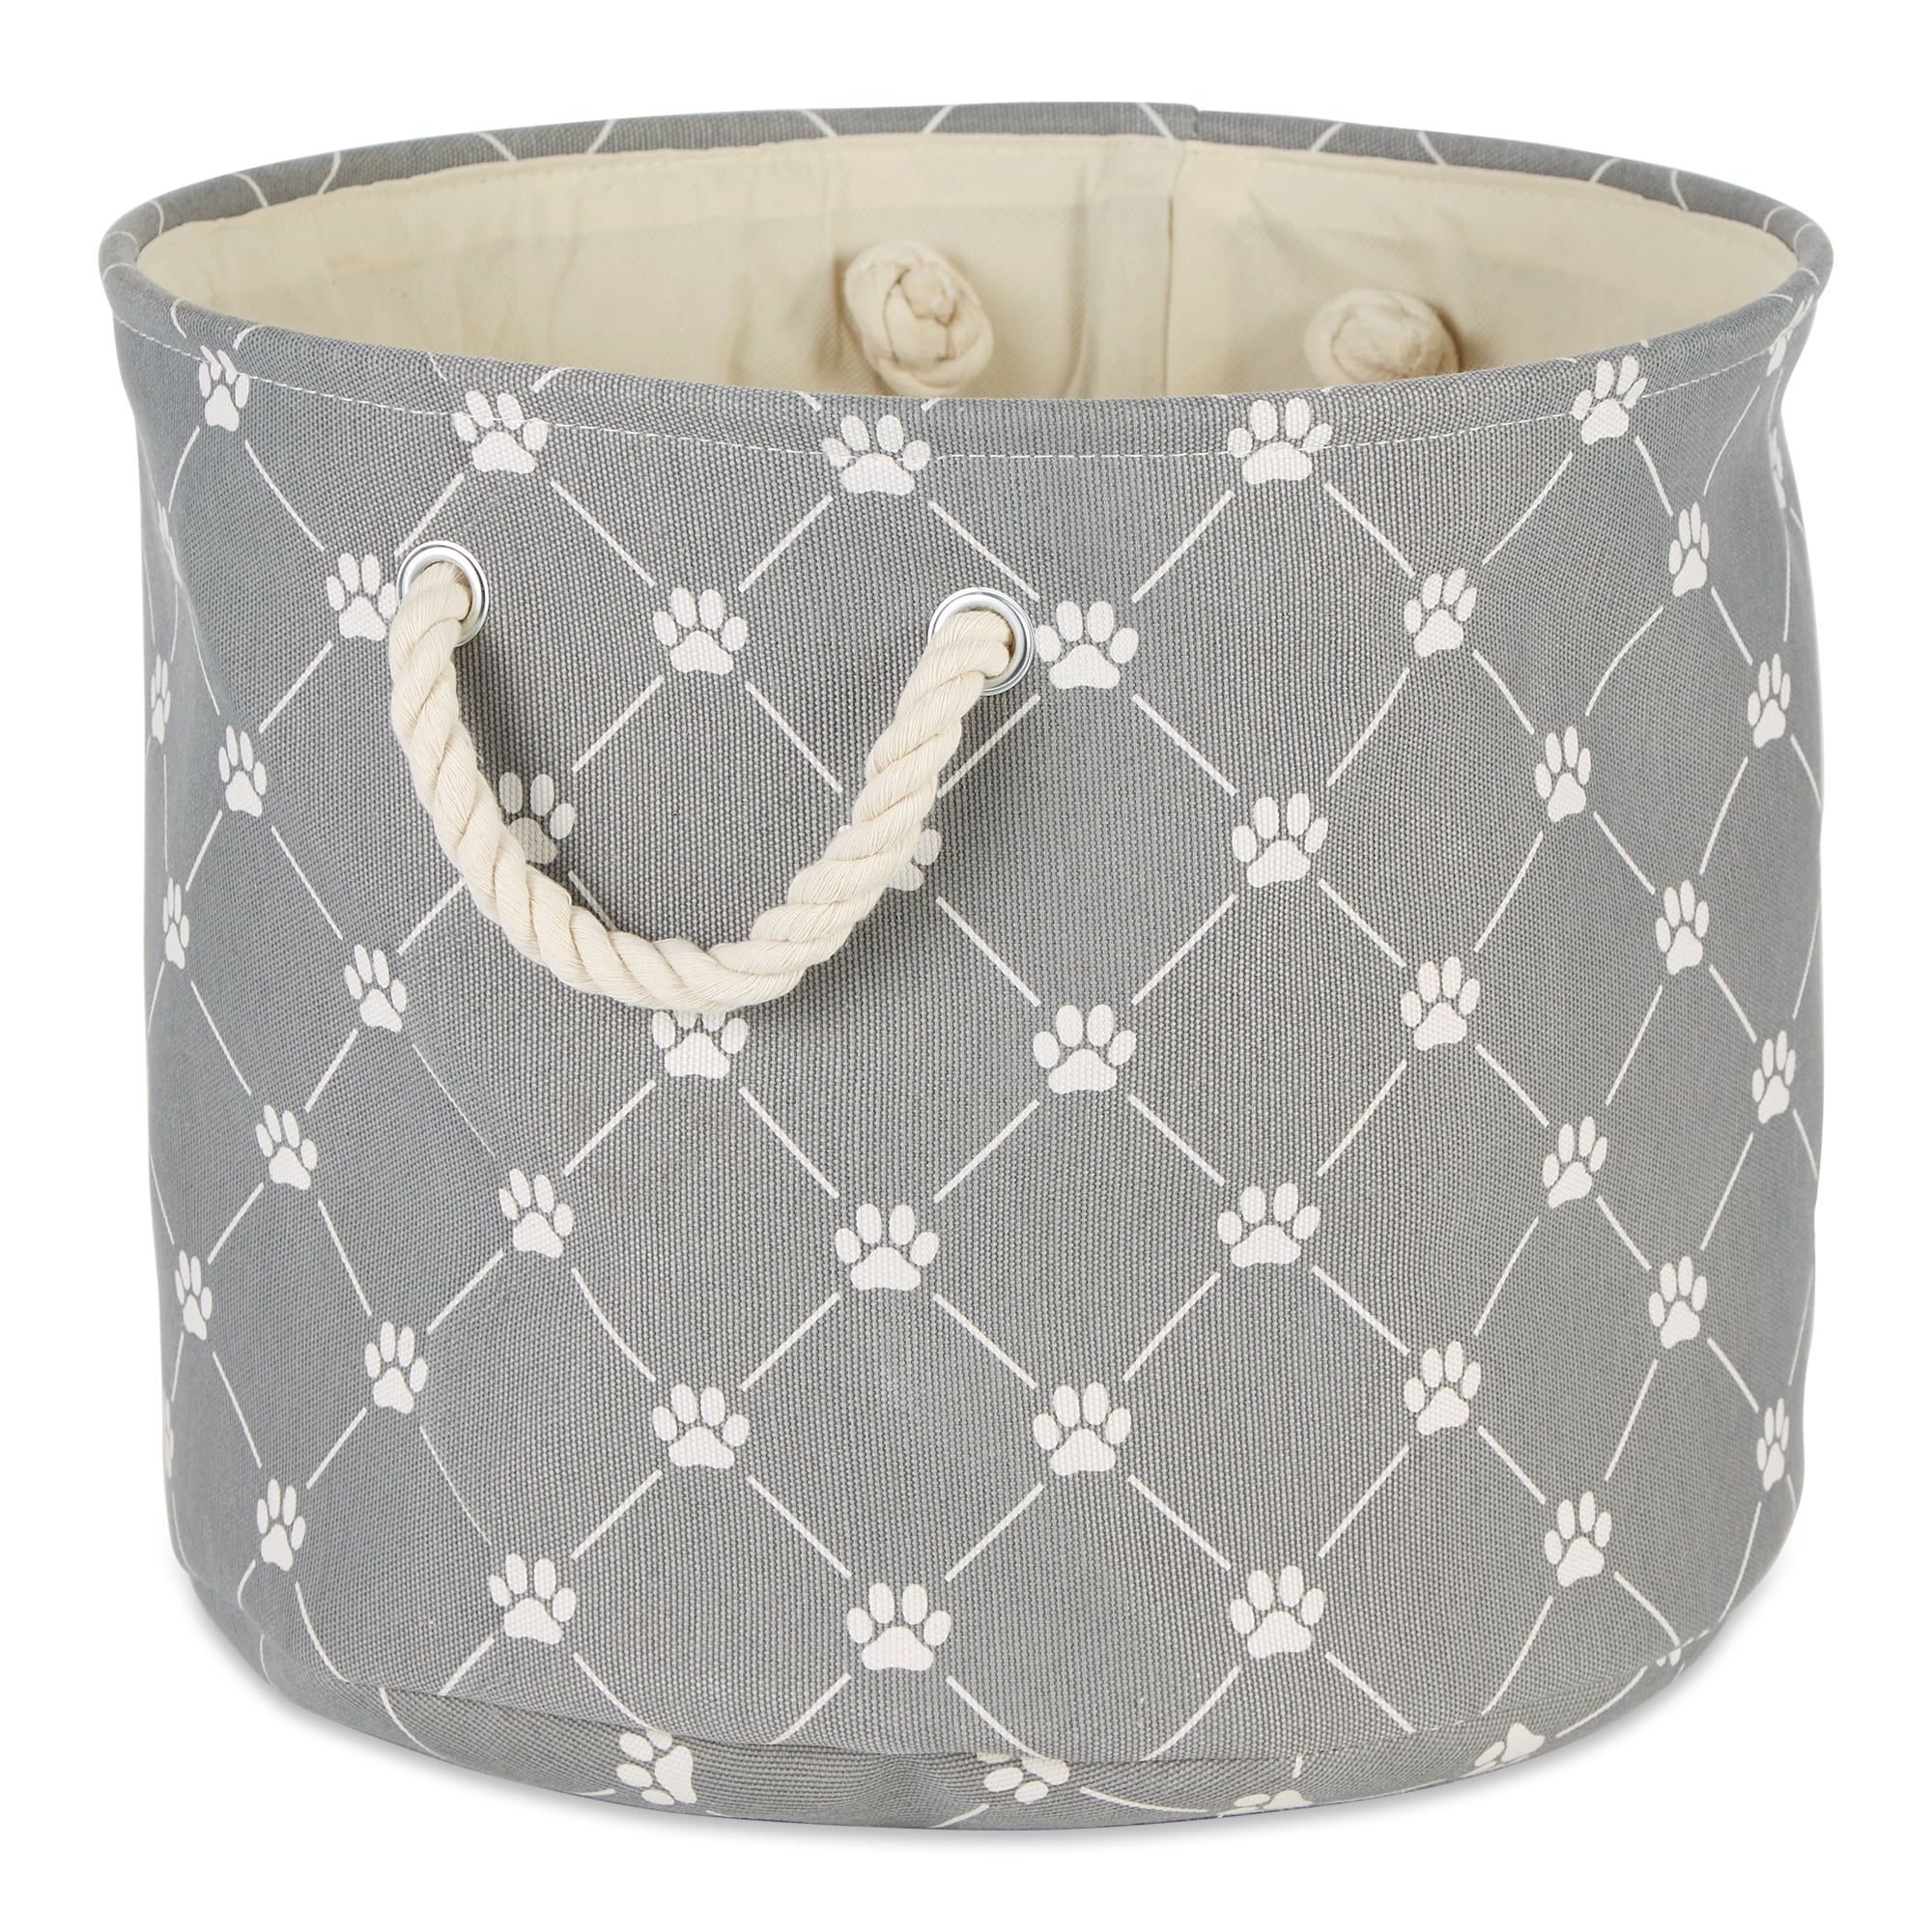 Picture of Design Imports CAMZ14210 Polyester Trellis Paw Round Pet Bin, Gray